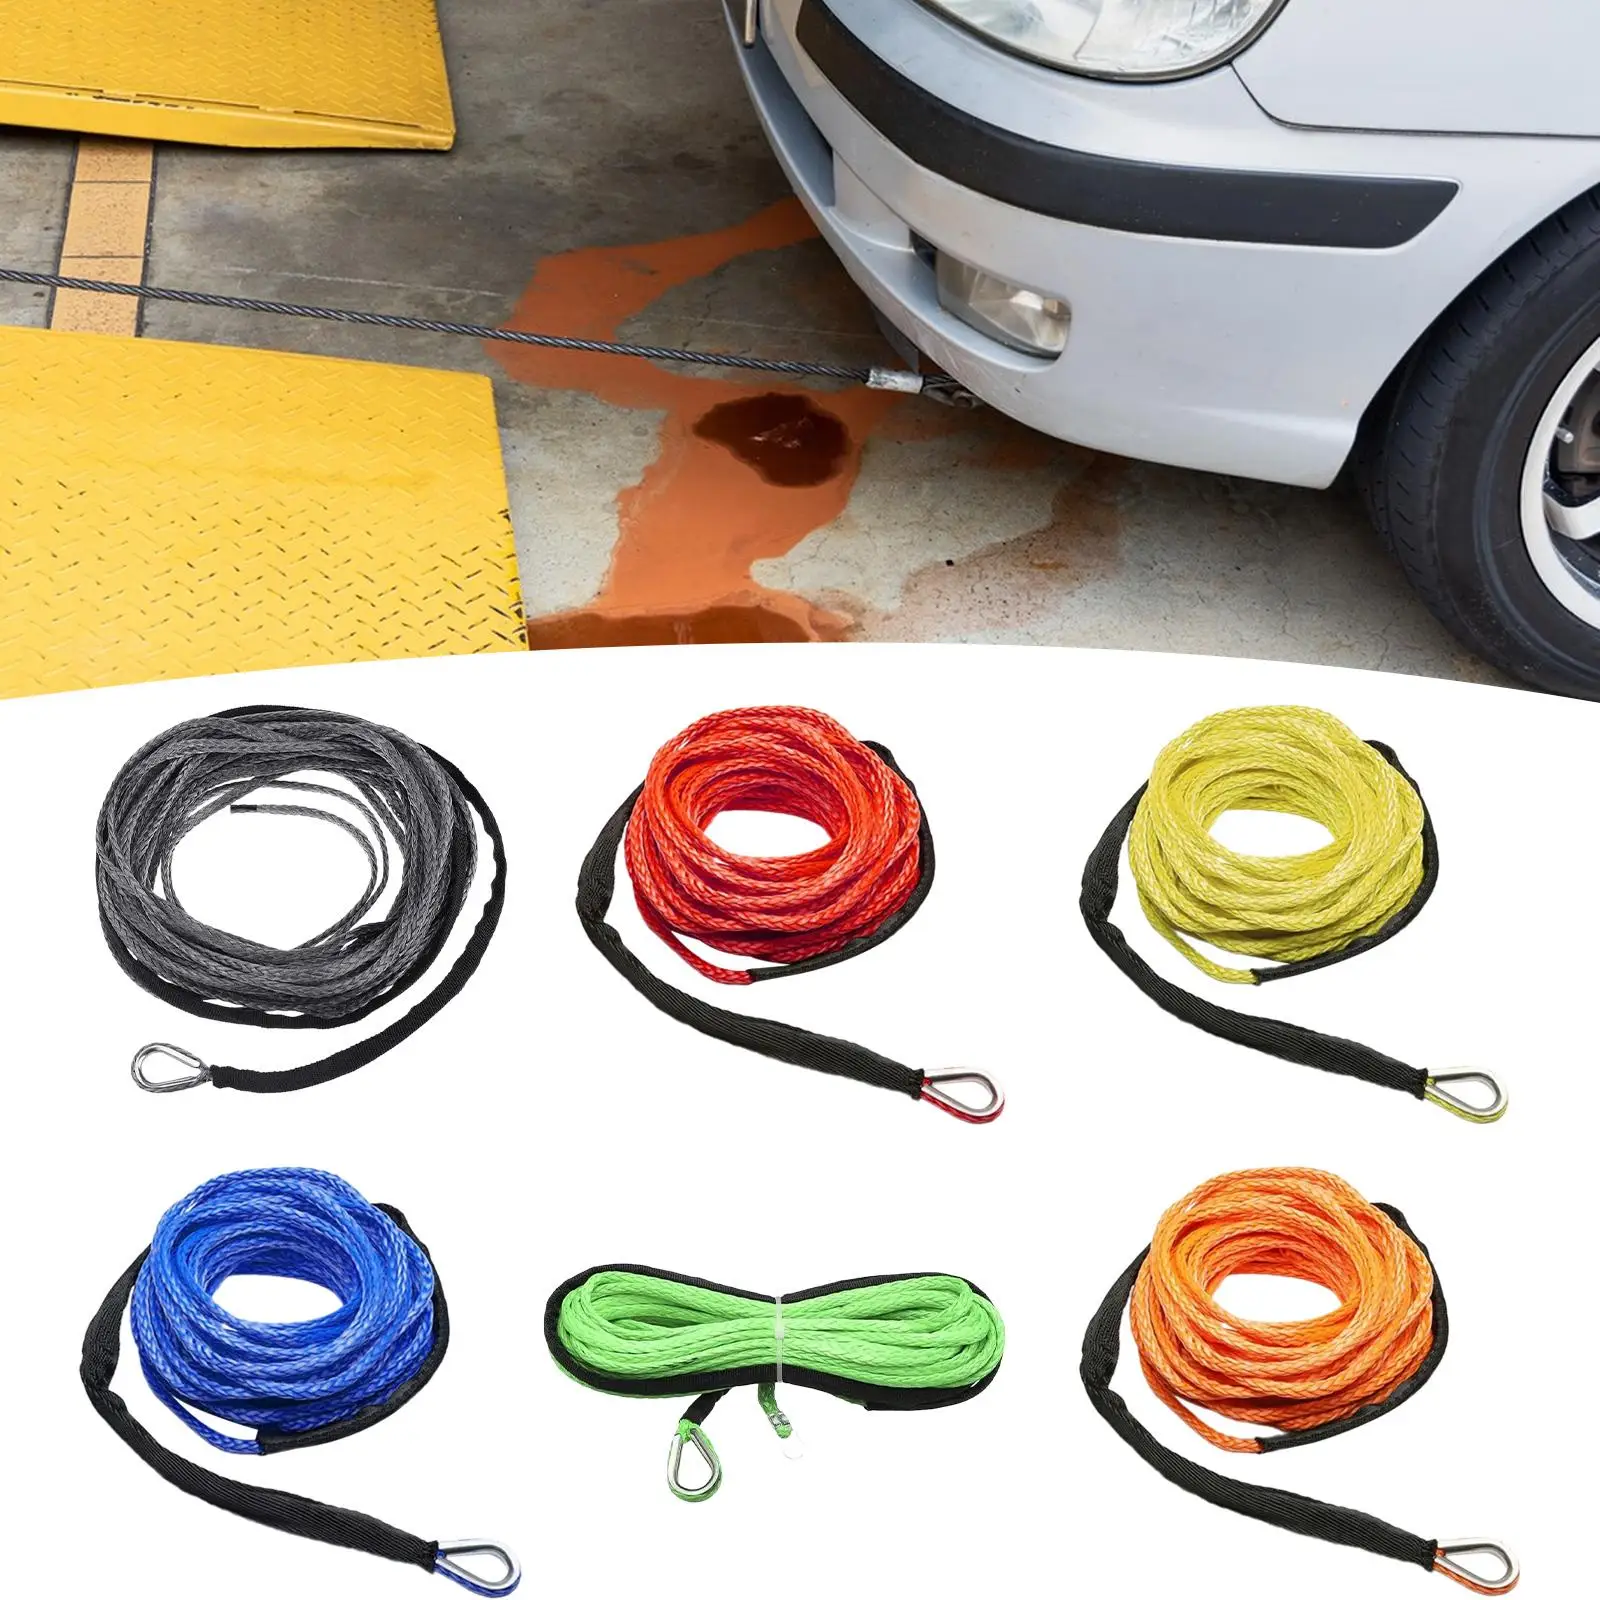 Synthetic Winch Rope Car Tow Strap 1/4 inch x 49 Feet 7700lbs with Sheath Winch Cable Towing Rope for Truck Vehicle ATV